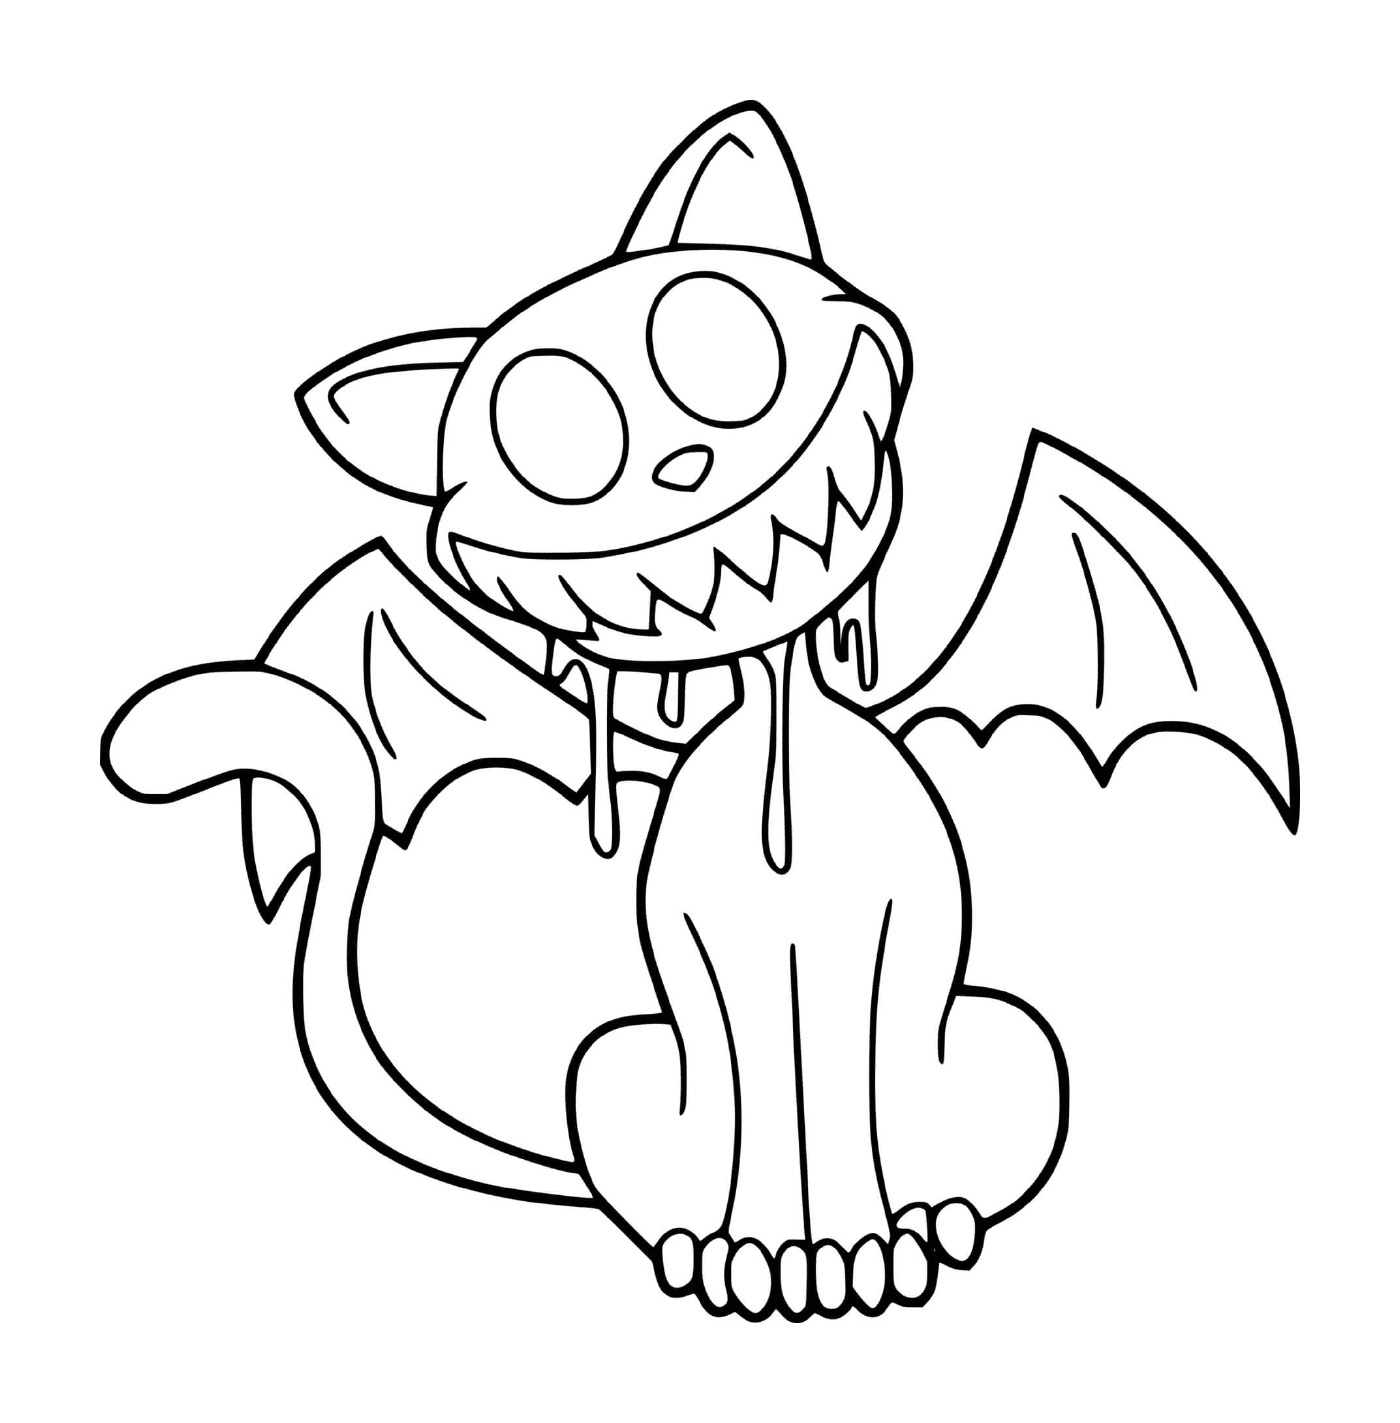  cat disguised as a scary bat 